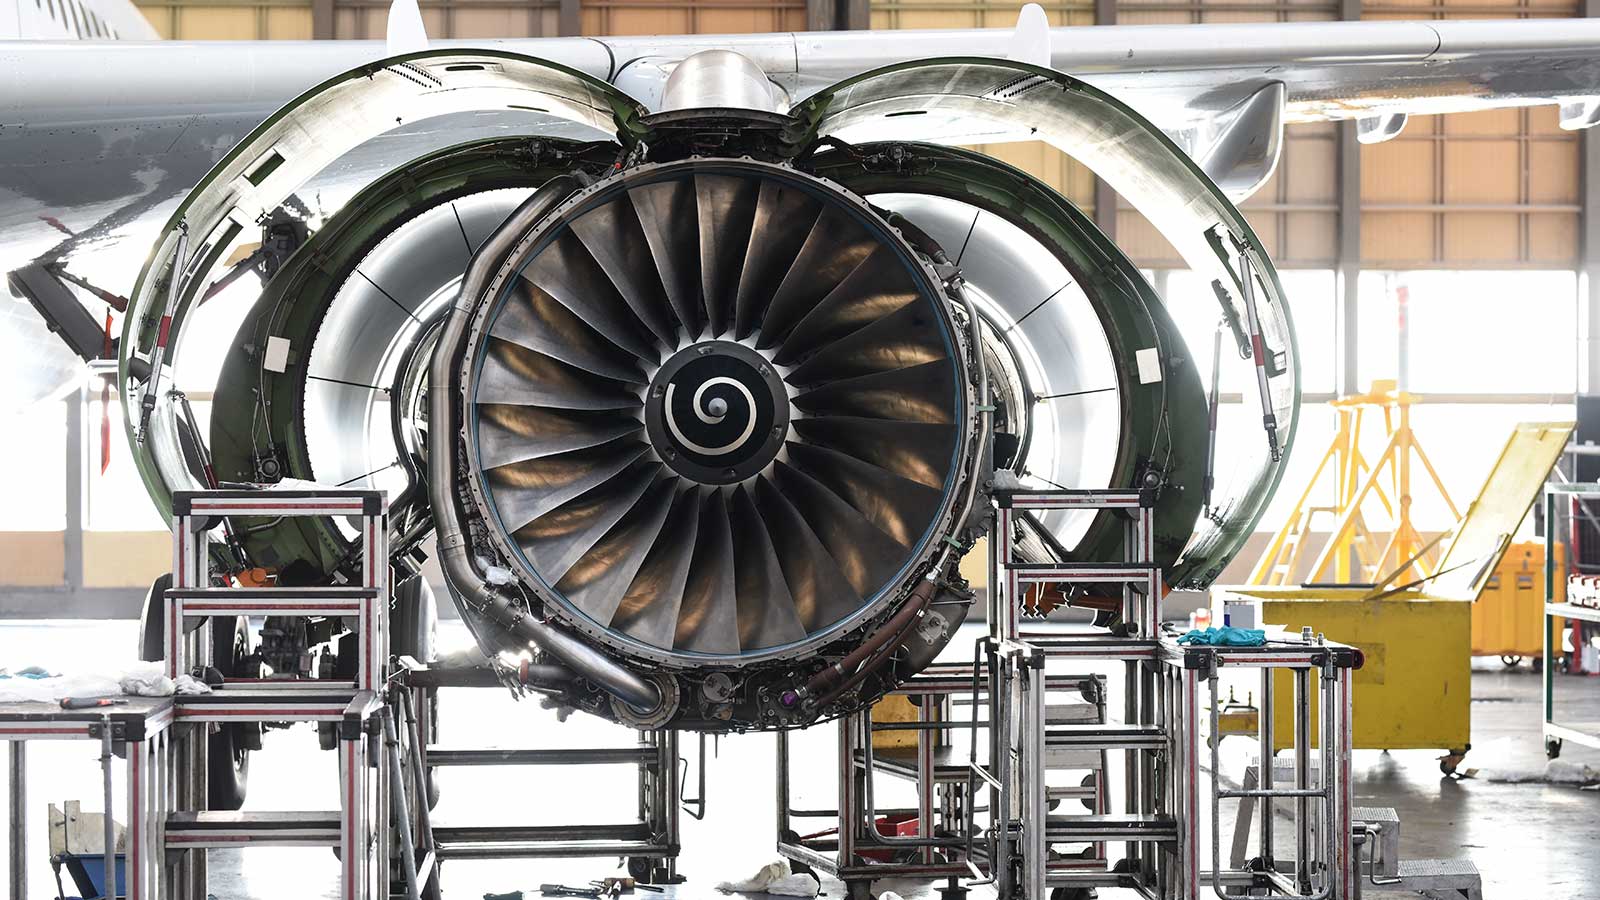 A jet engine being worked on in a large hangar